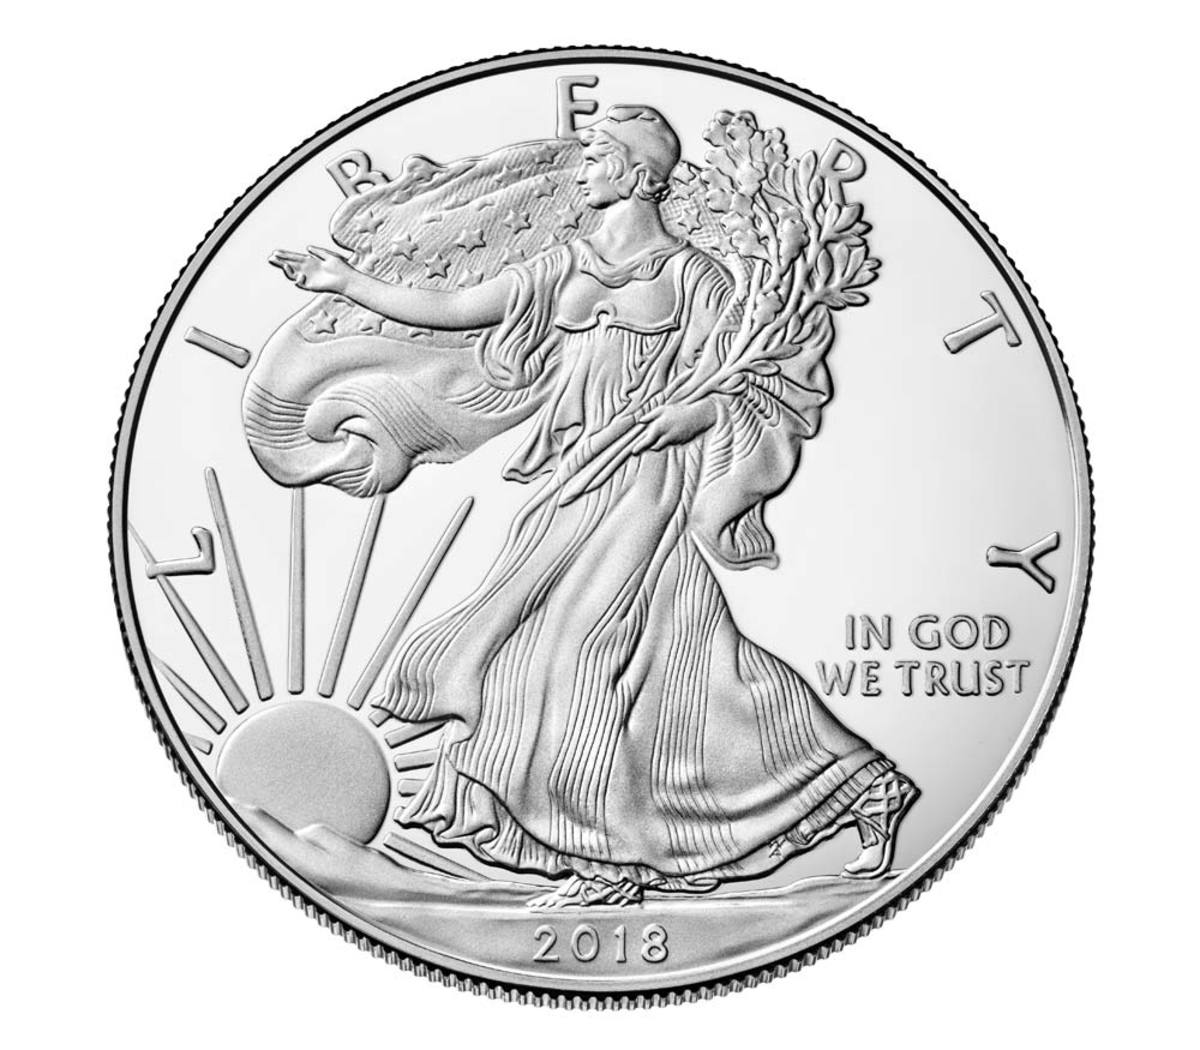 Shown is the American Eagle 2018 One ounce Silver Proof Coin with the Classic Lady Liberty design. . (Image courtesy of U.S. Mint.)